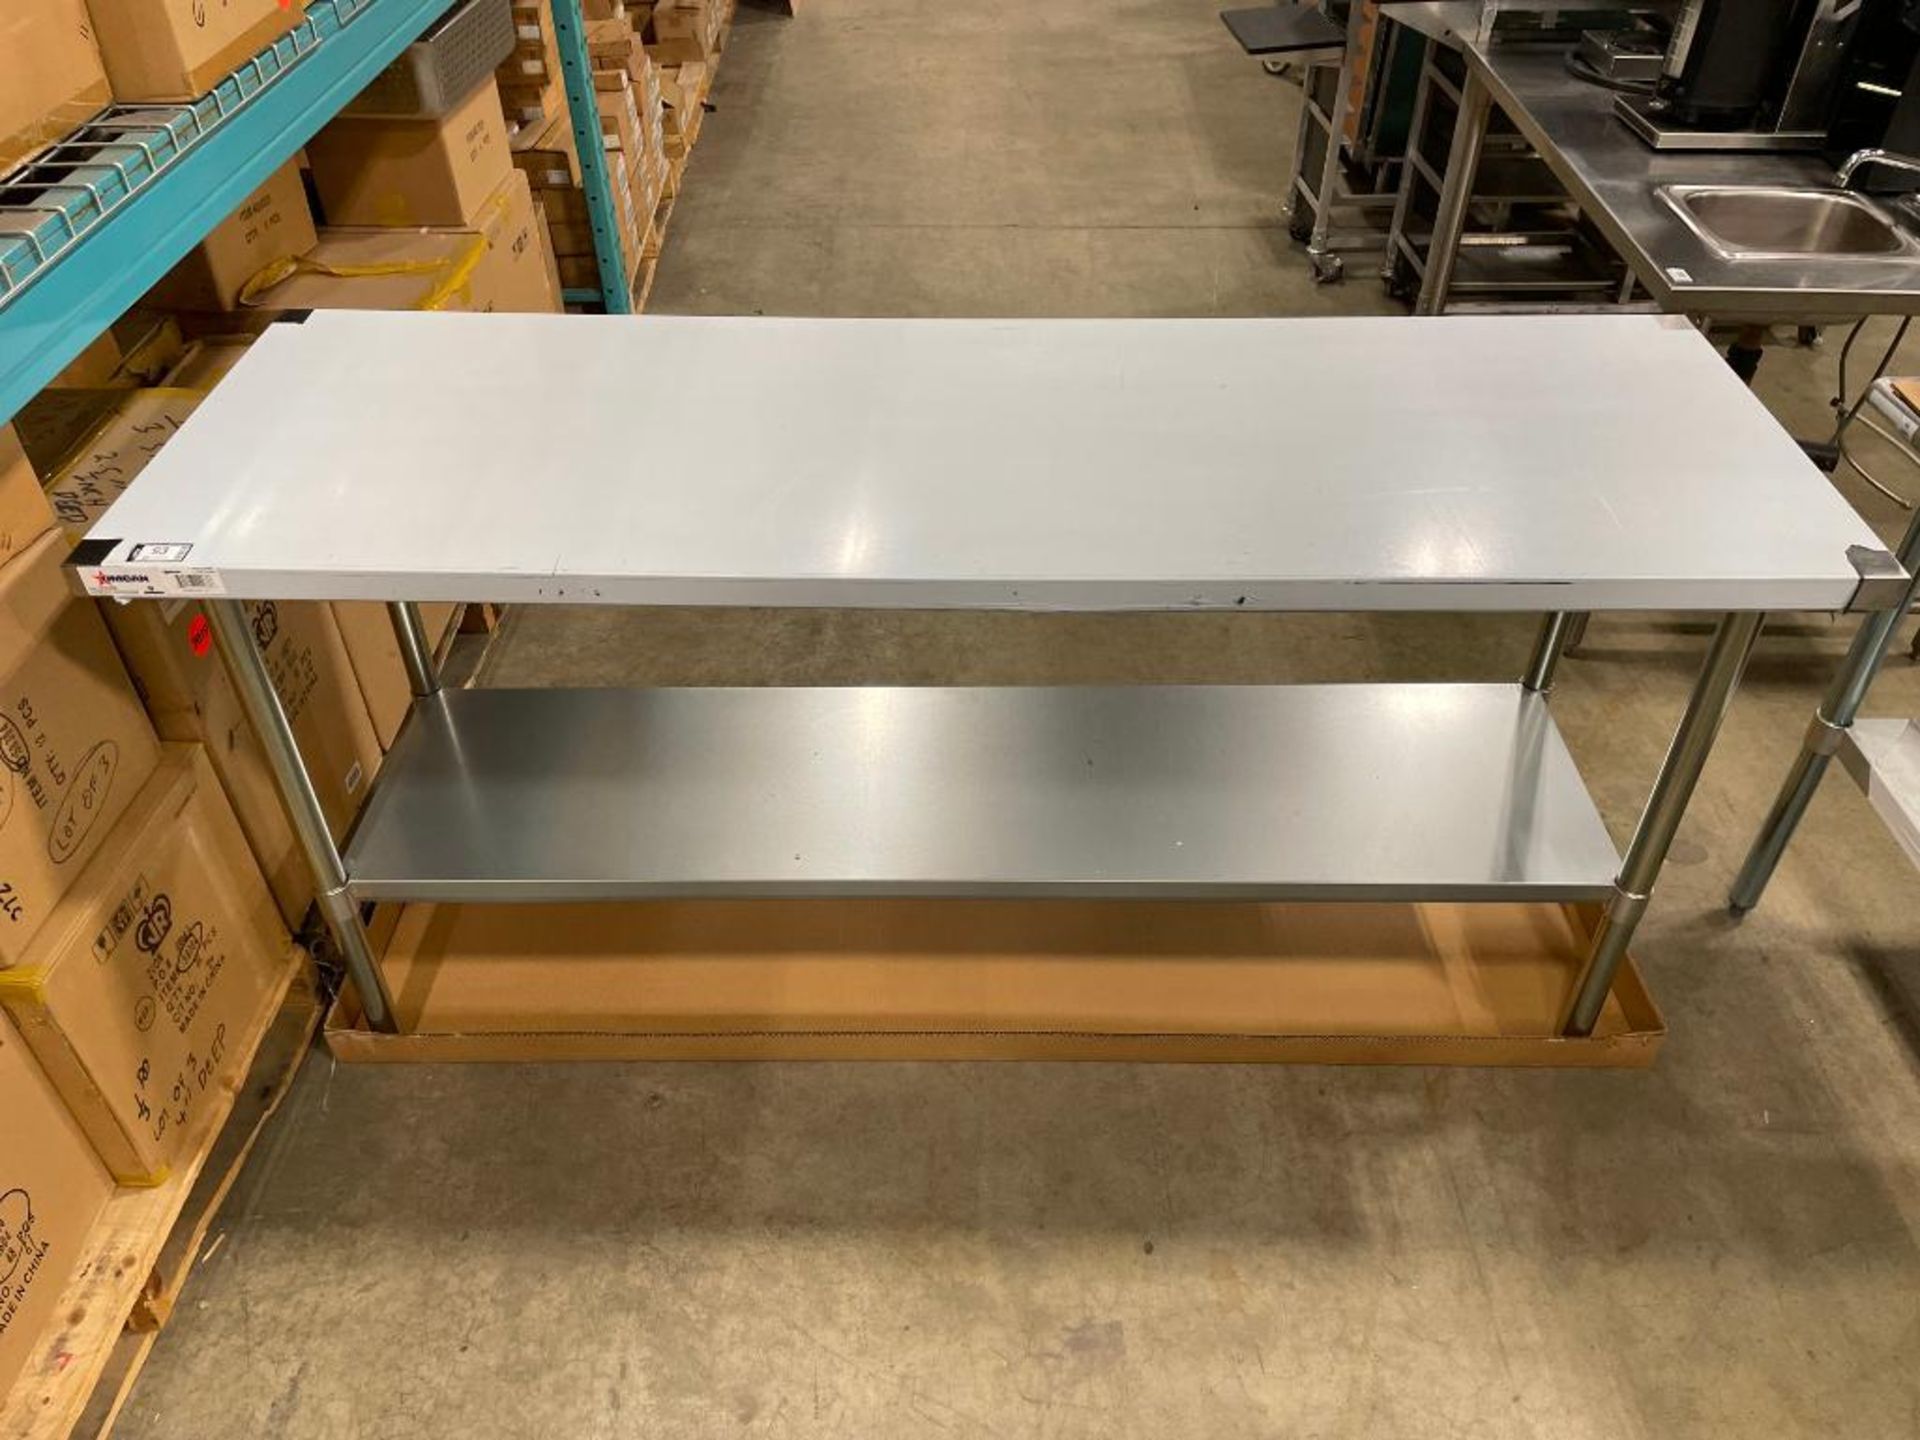 NEW 72" X 24" STAINLESS STEEL WORK TABLE - Image 4 of 4